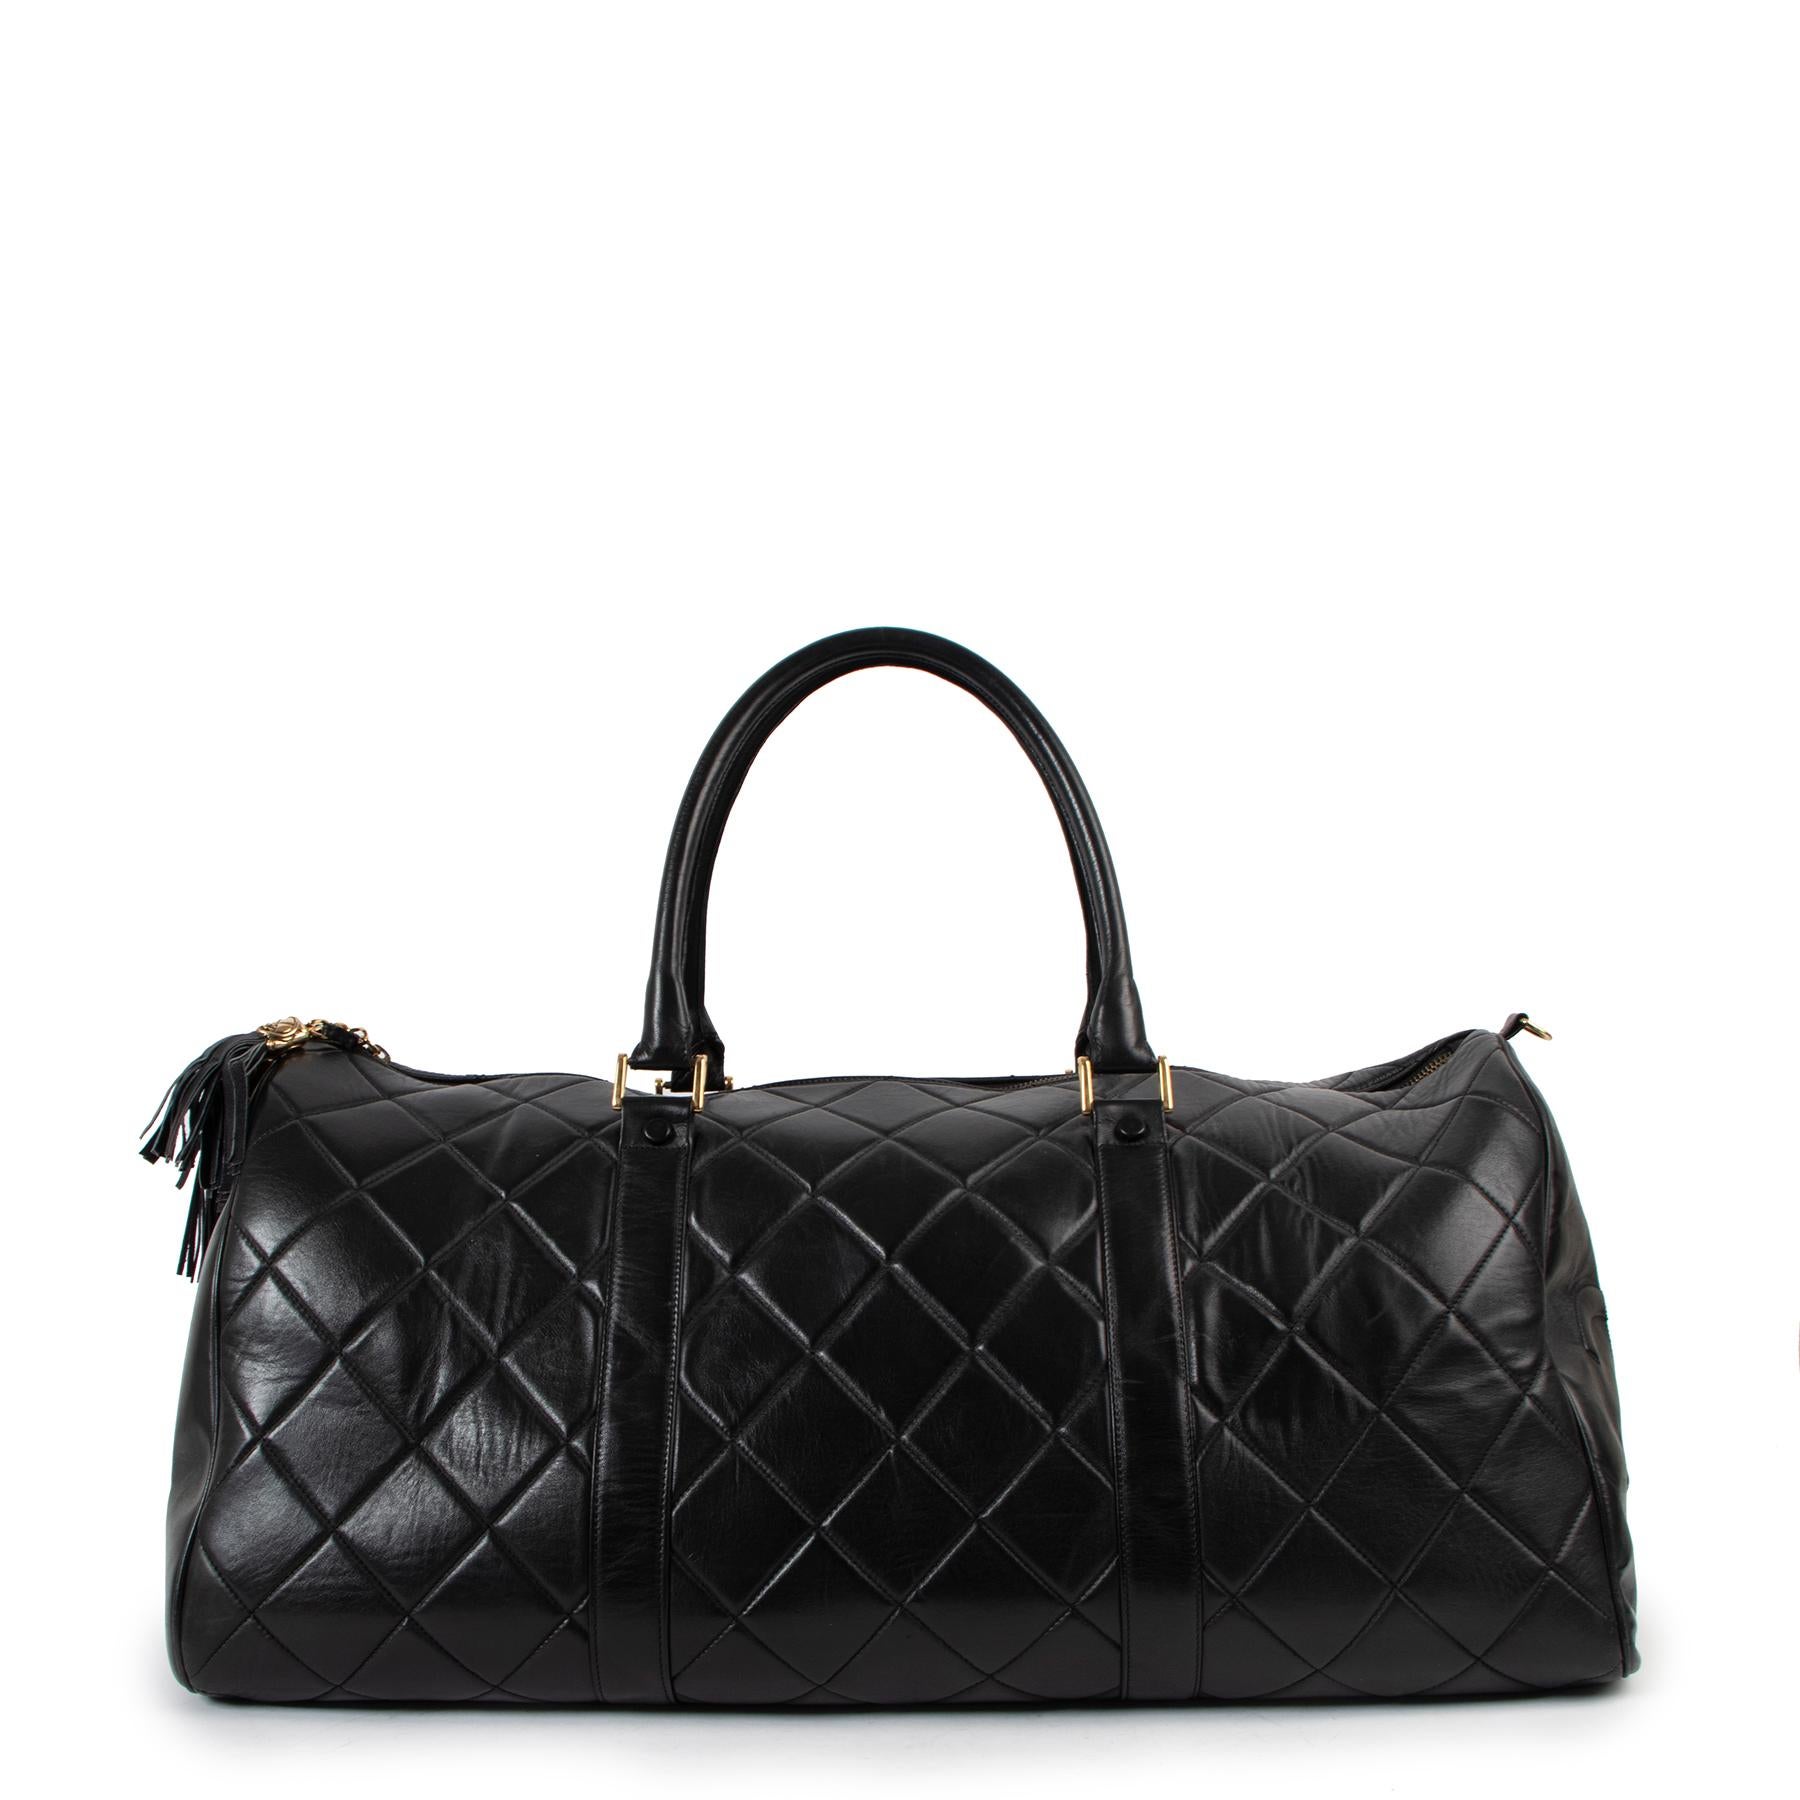 Chanel Black Quilted Lambskin Vintage Large Boston Travel Bag

This Chanel Vintage Large Duffle Bag is a travel must-have. Made from ultra-soft lambskin in the iconic diamond quilting. The bag features stitched CC logo on both sides. The double